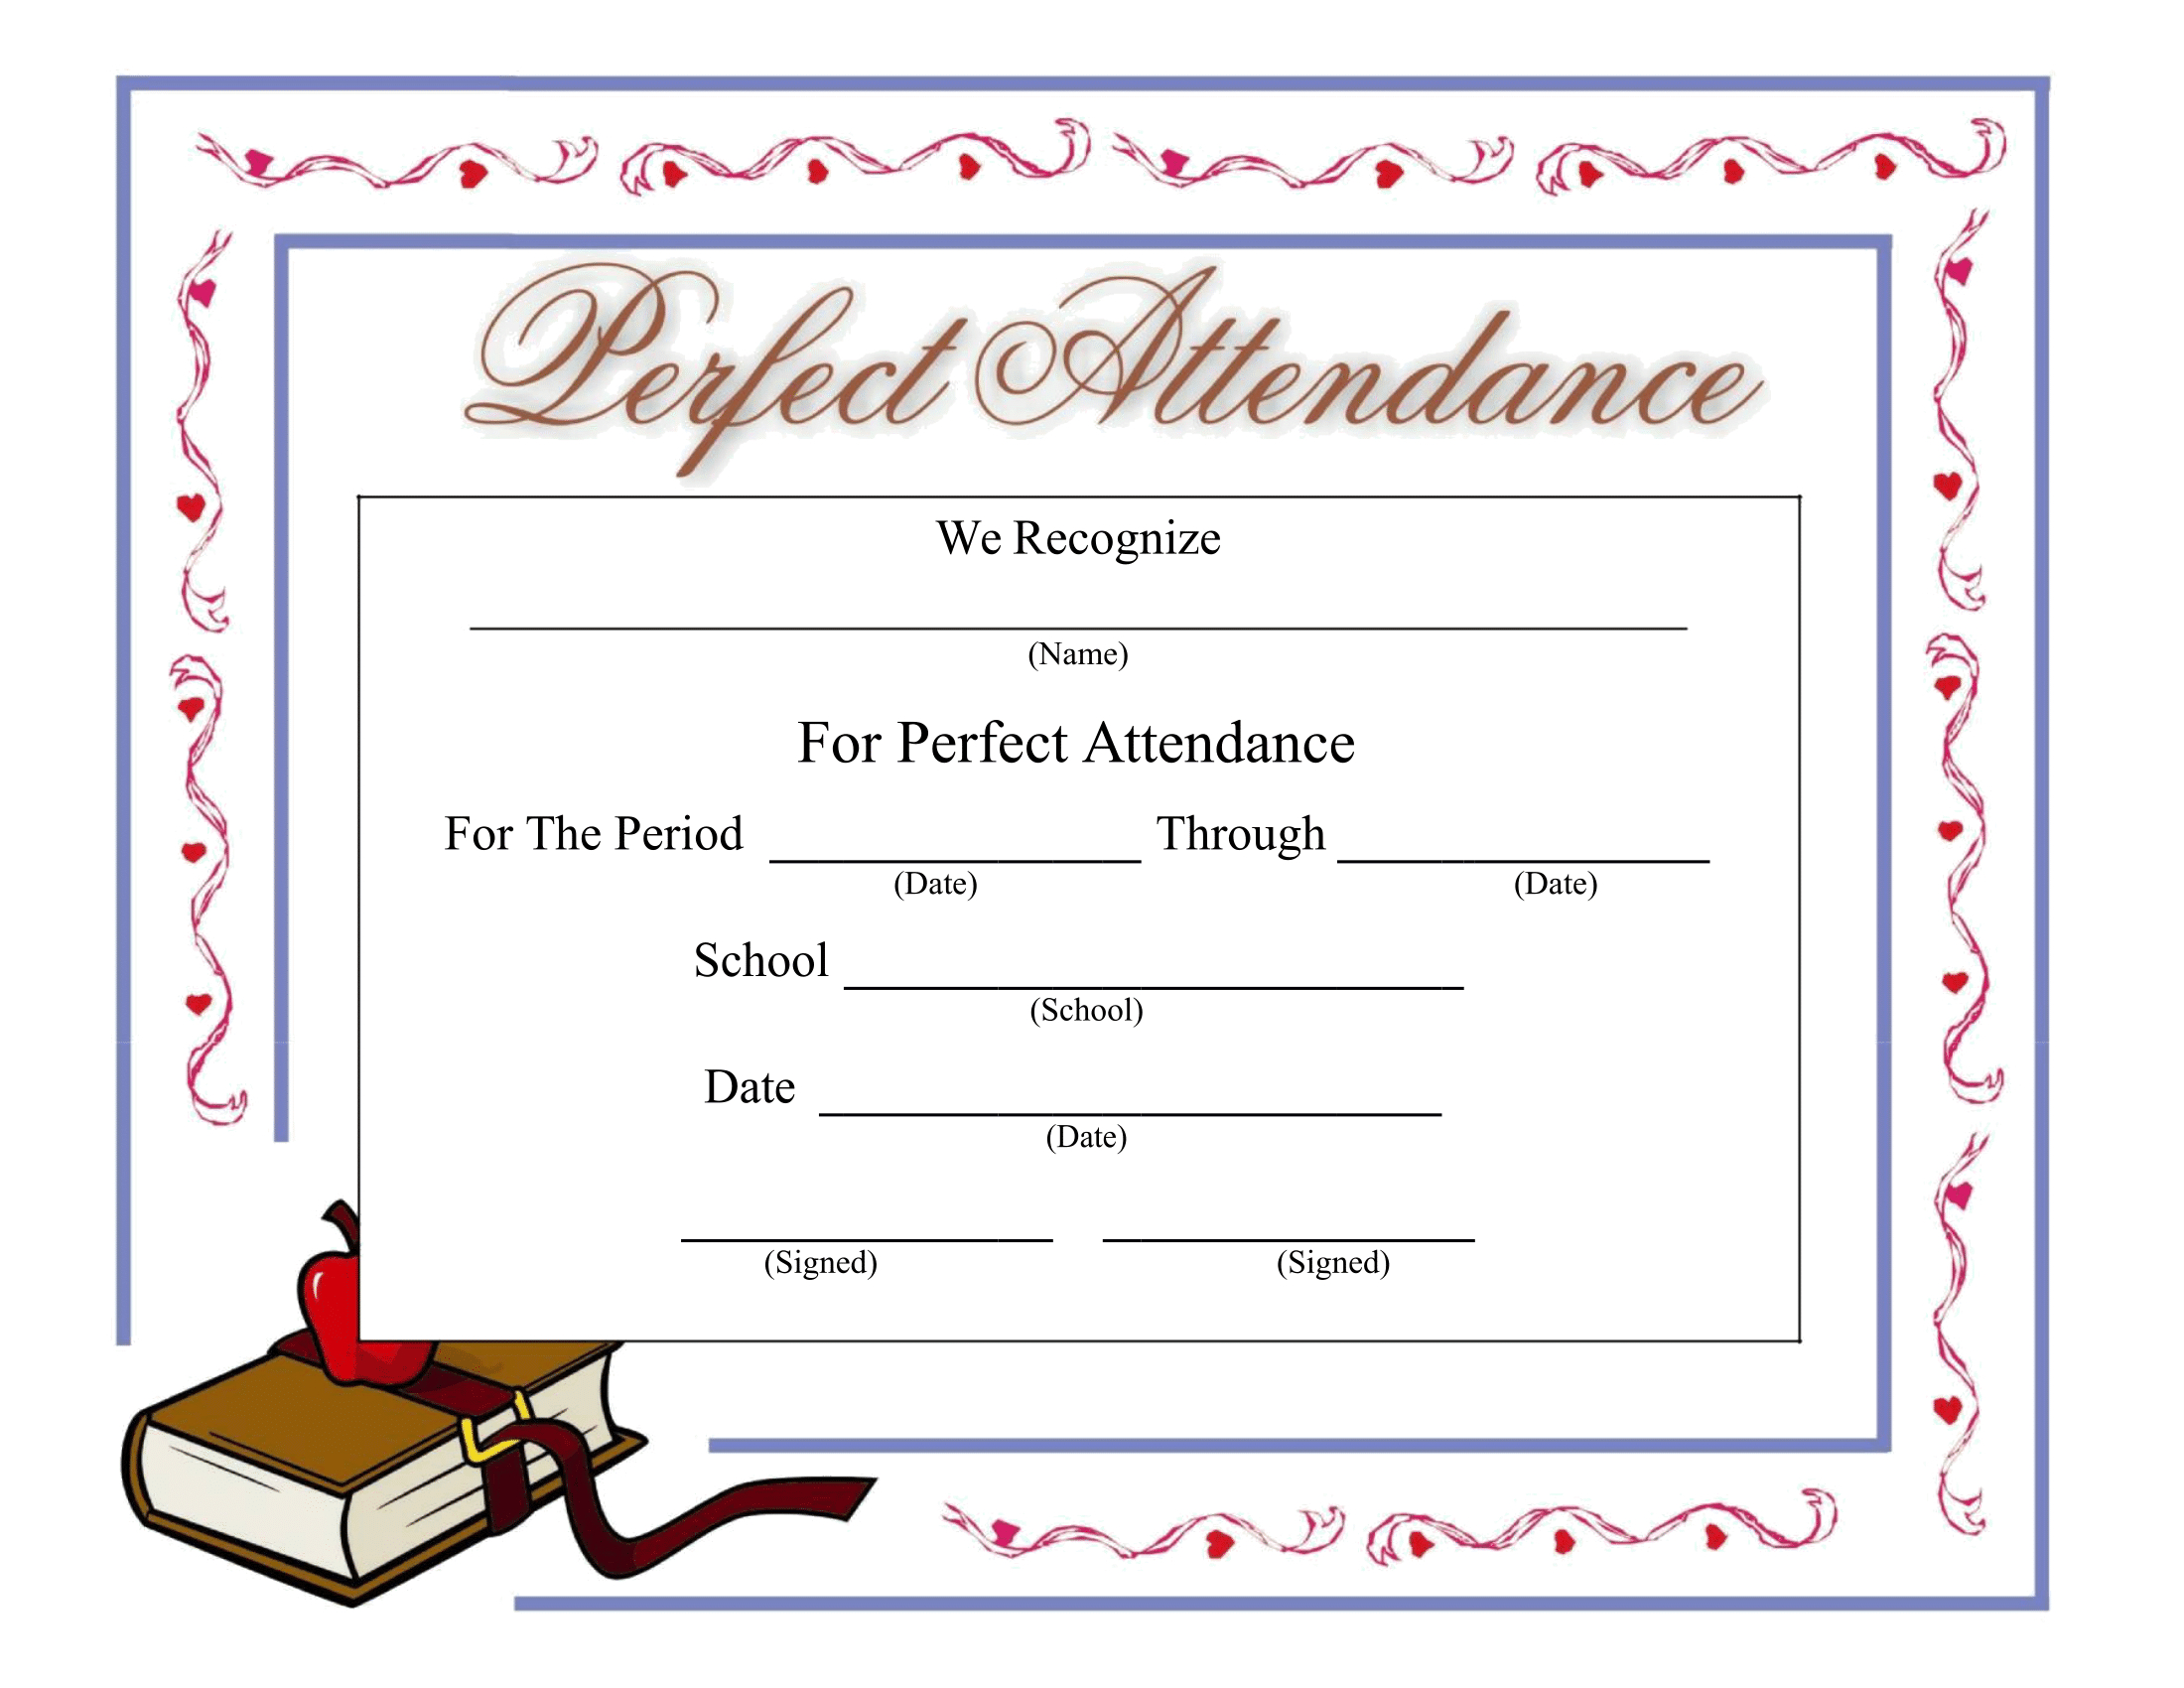 Stupendous Perfect Attendance Certificate Printable | Dora's Throughout Free Vbs Certificate Templates